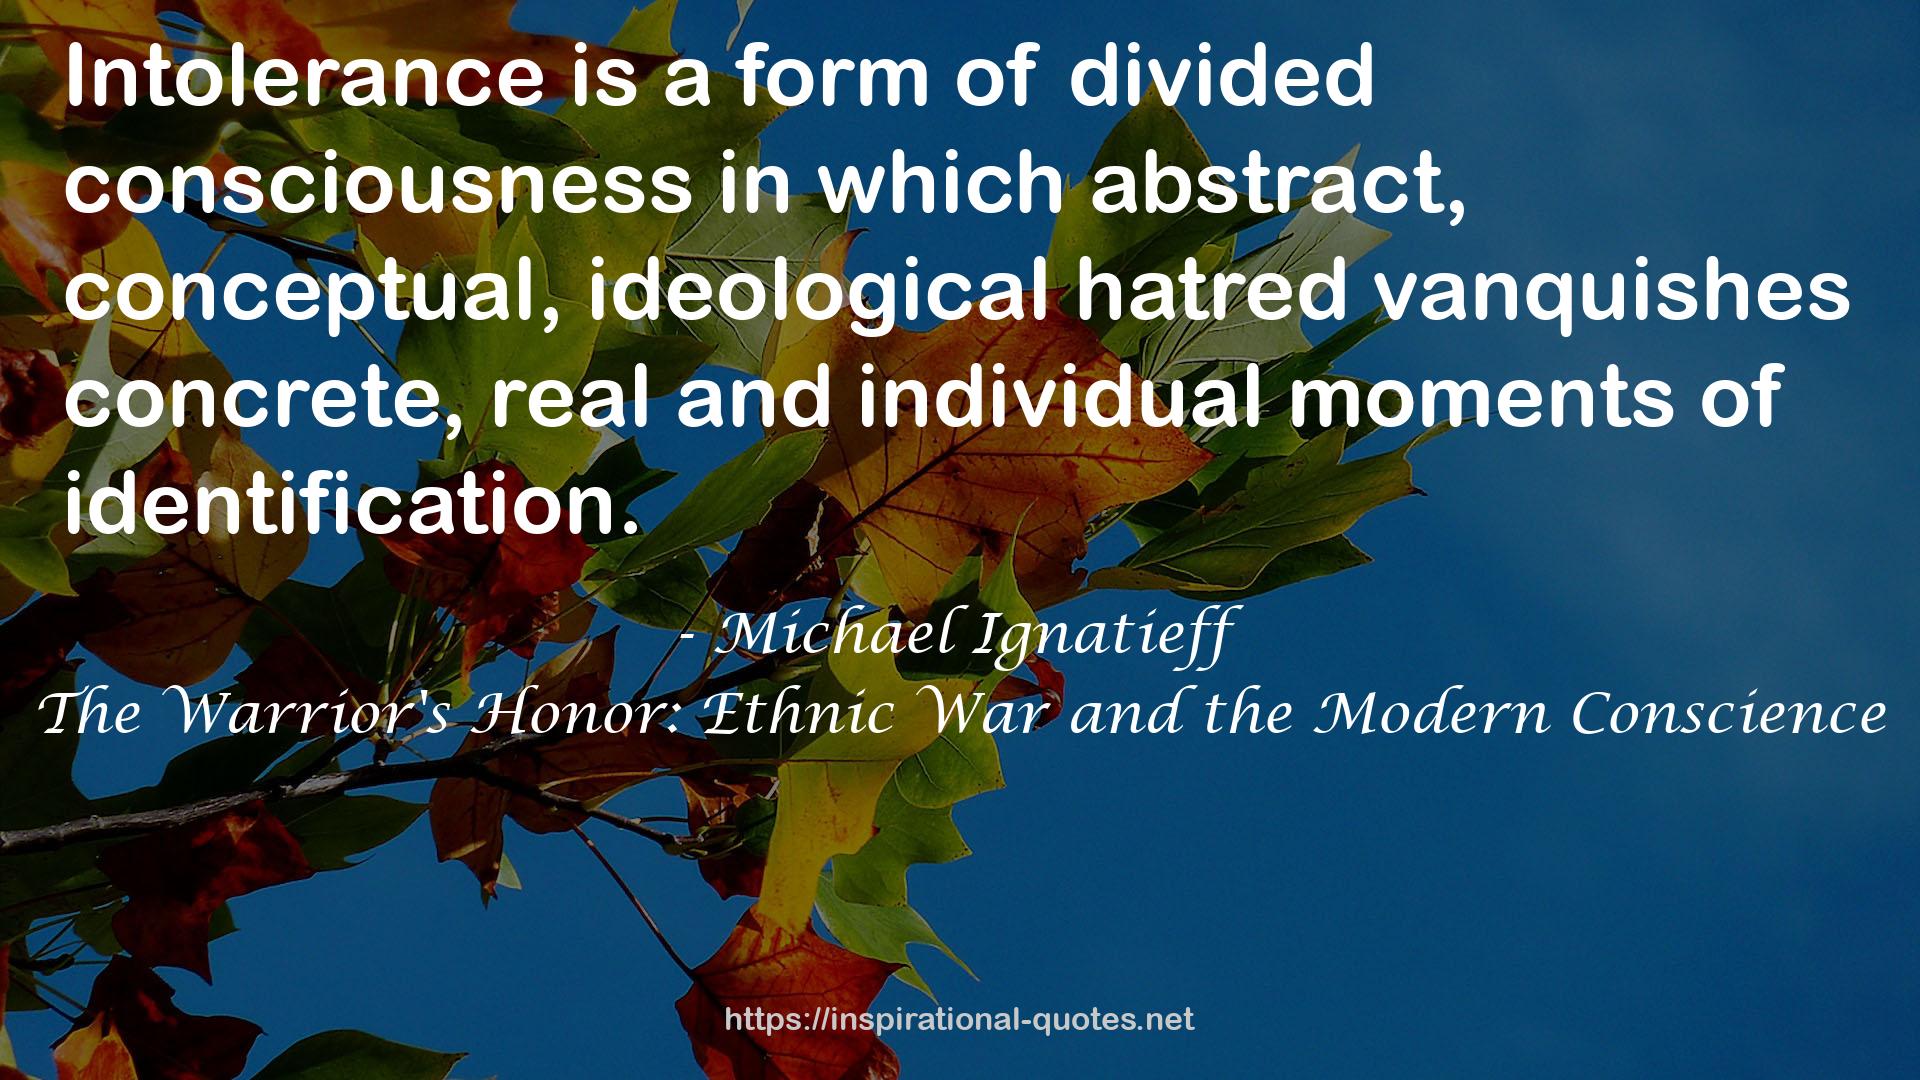 The Warrior's Honor: Ethnic War and the Modern Conscience QUOTES